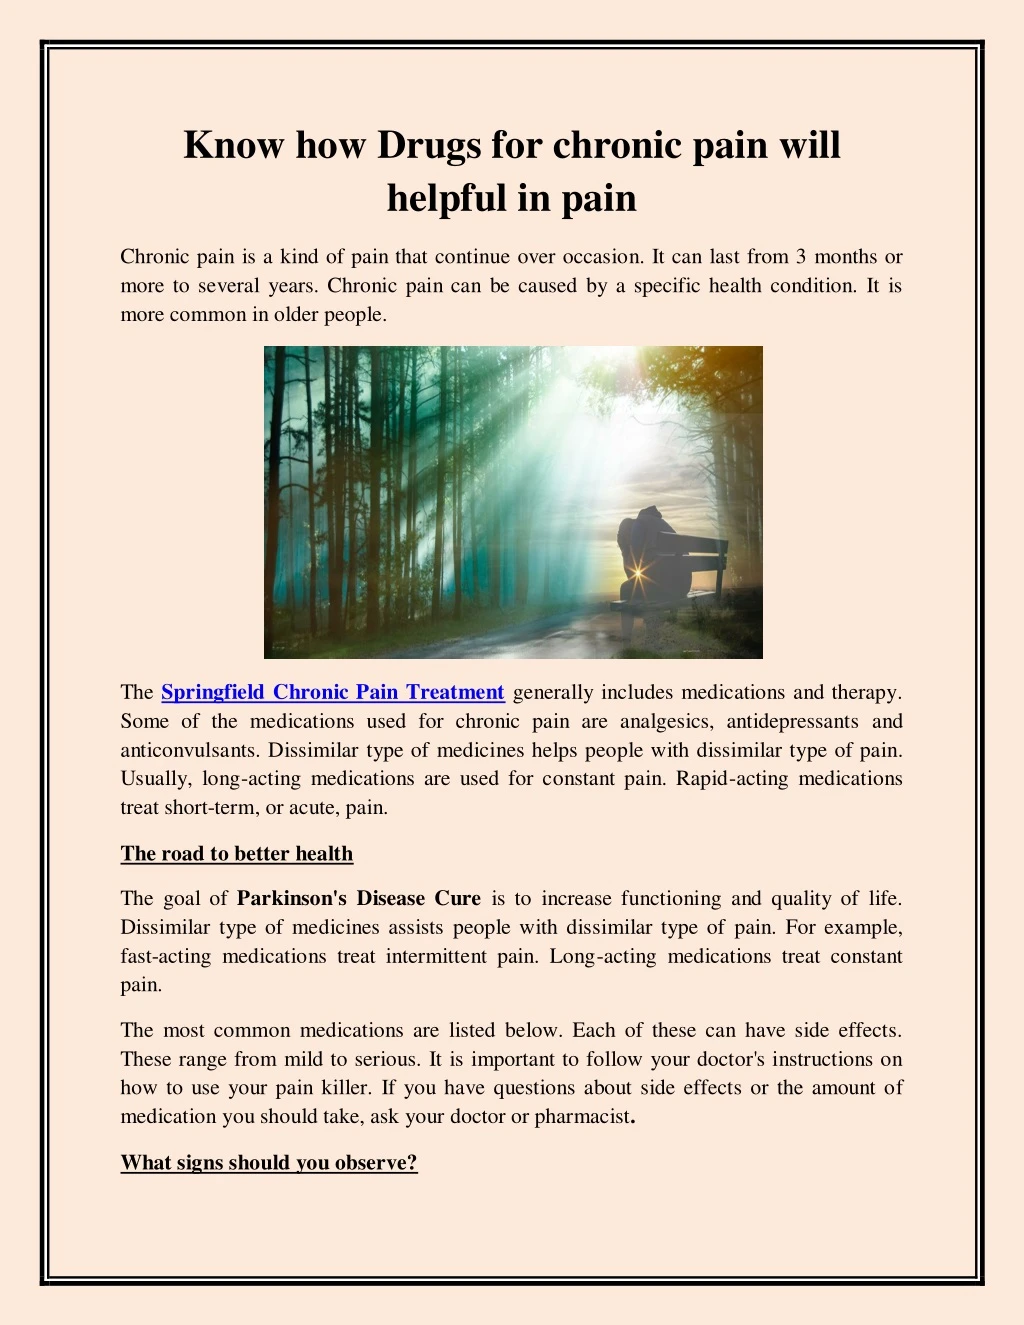 know how drugs for chronic pain will helpful